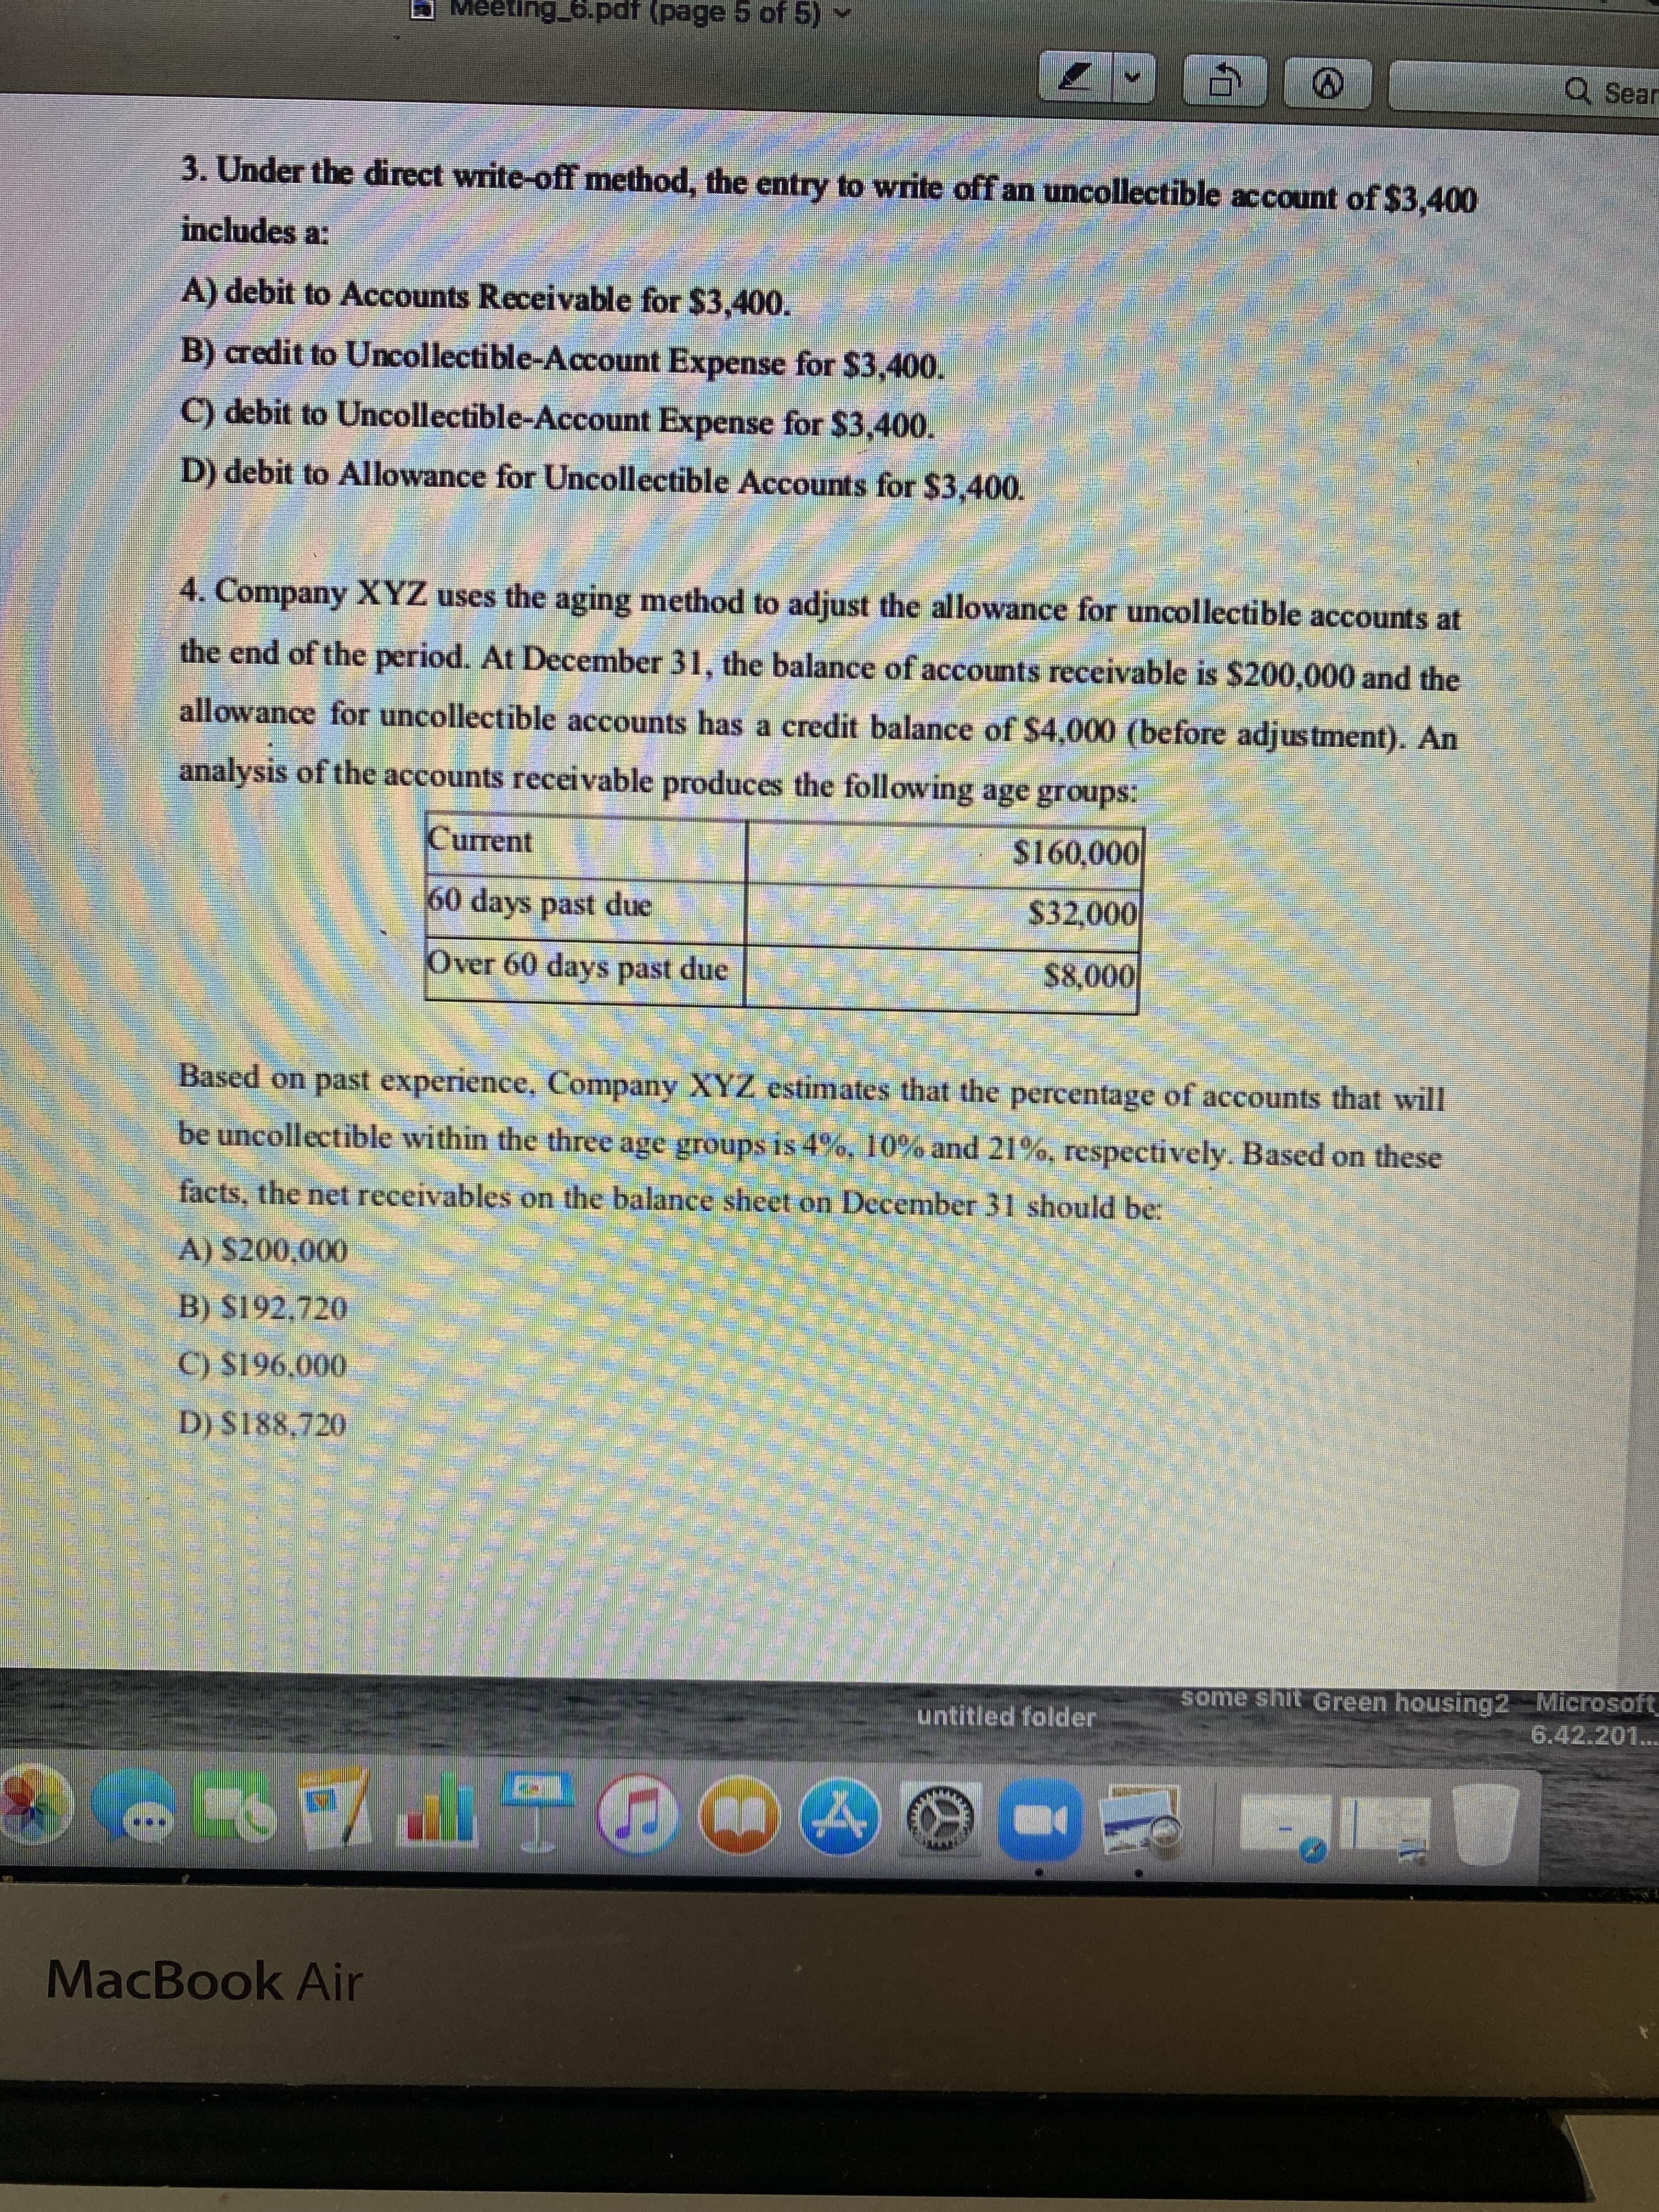 Meeting_6.pdf (page 5 of 5)-
Q Sear
3. Under the direct write-off method, the entry to write off an uncollectible account of $3,400
includes a:
A) debit to Accounts Receivable for $3,400.
B) credit to Uncollectible-Account Expense for $3,400.
C) debit to Uncollectible-Account Expense for $3,400.
D) debit to Allowance for Uncollectible Accounts for $3,400.
4. Company XYZ uses the aging method to adjust the allowance for uncollectible accounts at
the end of the period. At December 31, the balance of accounts receivable is $200,000 and the
allowance for uncollectible accounts has a credit balance of $4,000 (before adjustment). An
analysis of the accounts receivable produces the following age groups:
Current
000'091S
60 days past due
$32,000
Over 60 days past due
0000
Based on past experience, Company XYZ estimates that the percentage of accounts that will
be uncollectible within the three age groups is 4%, 10% and 21%, respectively. Based on these
facts, the net receivables on the balance sheet on December 31 should be:
A) $200,000
B) S192,720
C) S196,000
D) S188,720
some shit Green housing2 Microsoft
6.42.201...
untitled folder
MacBook Air
